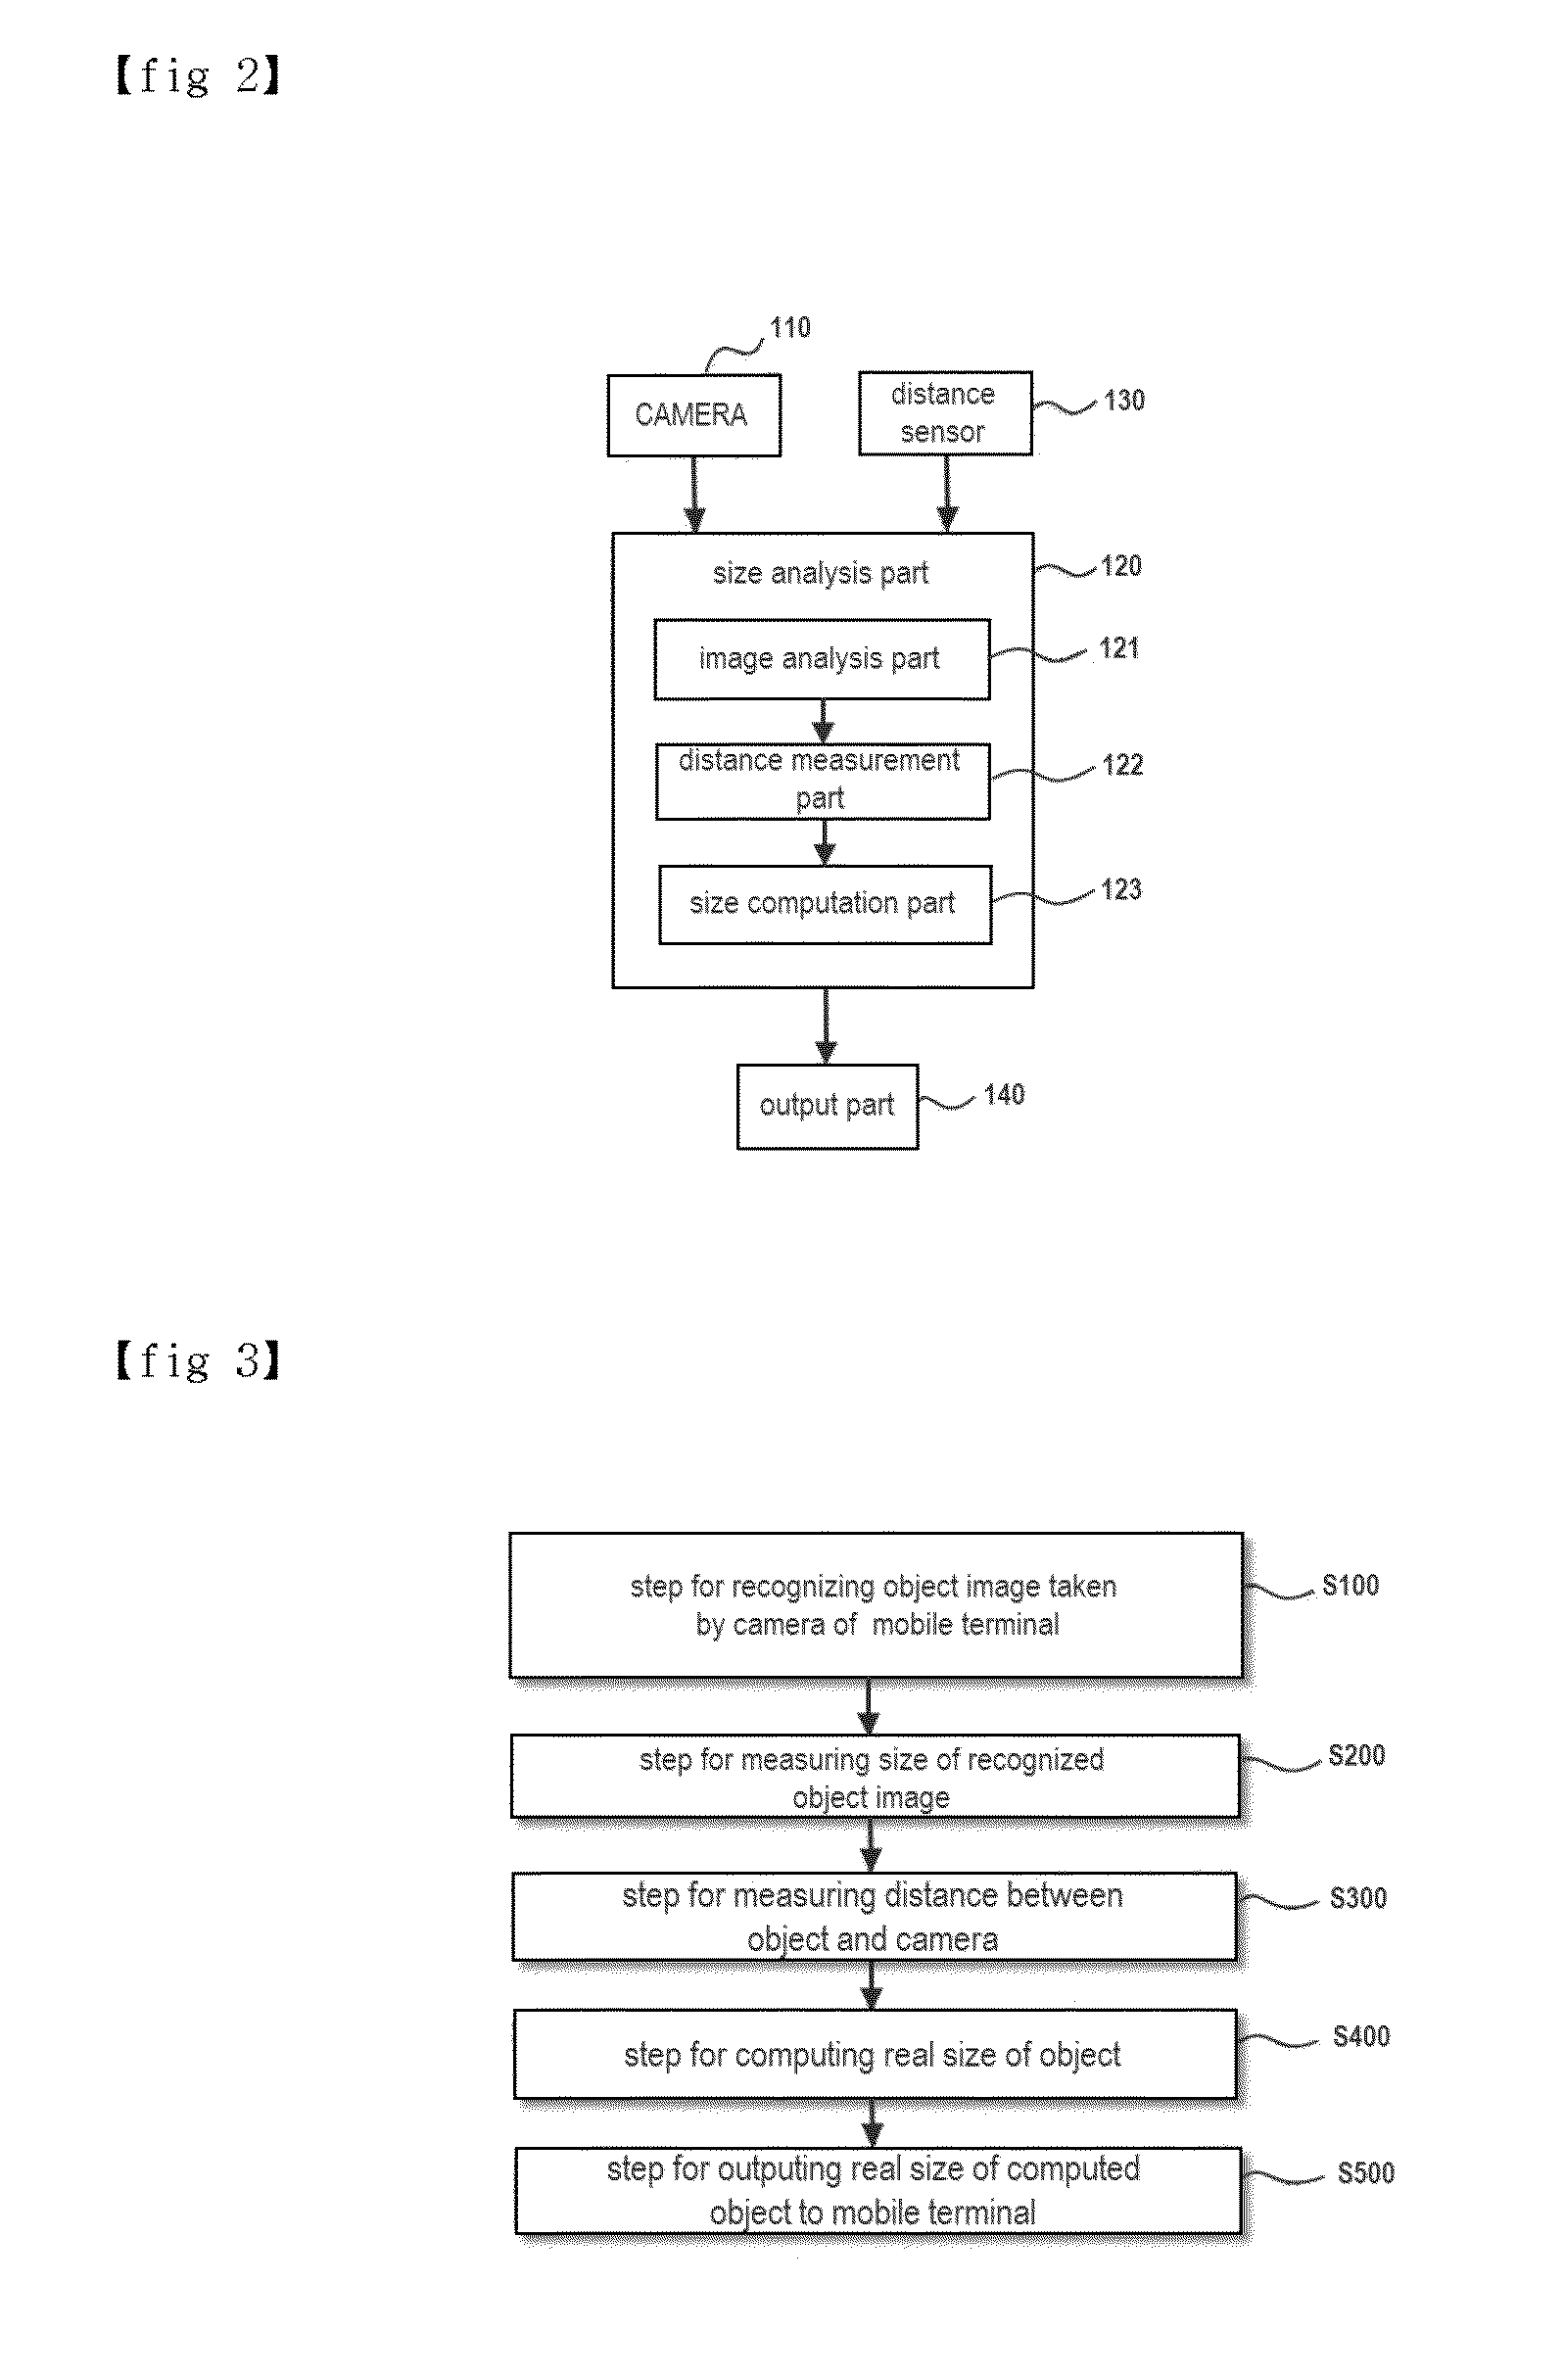 Method for Measuring Real Size of Object Using Camera of Mobile Terminal